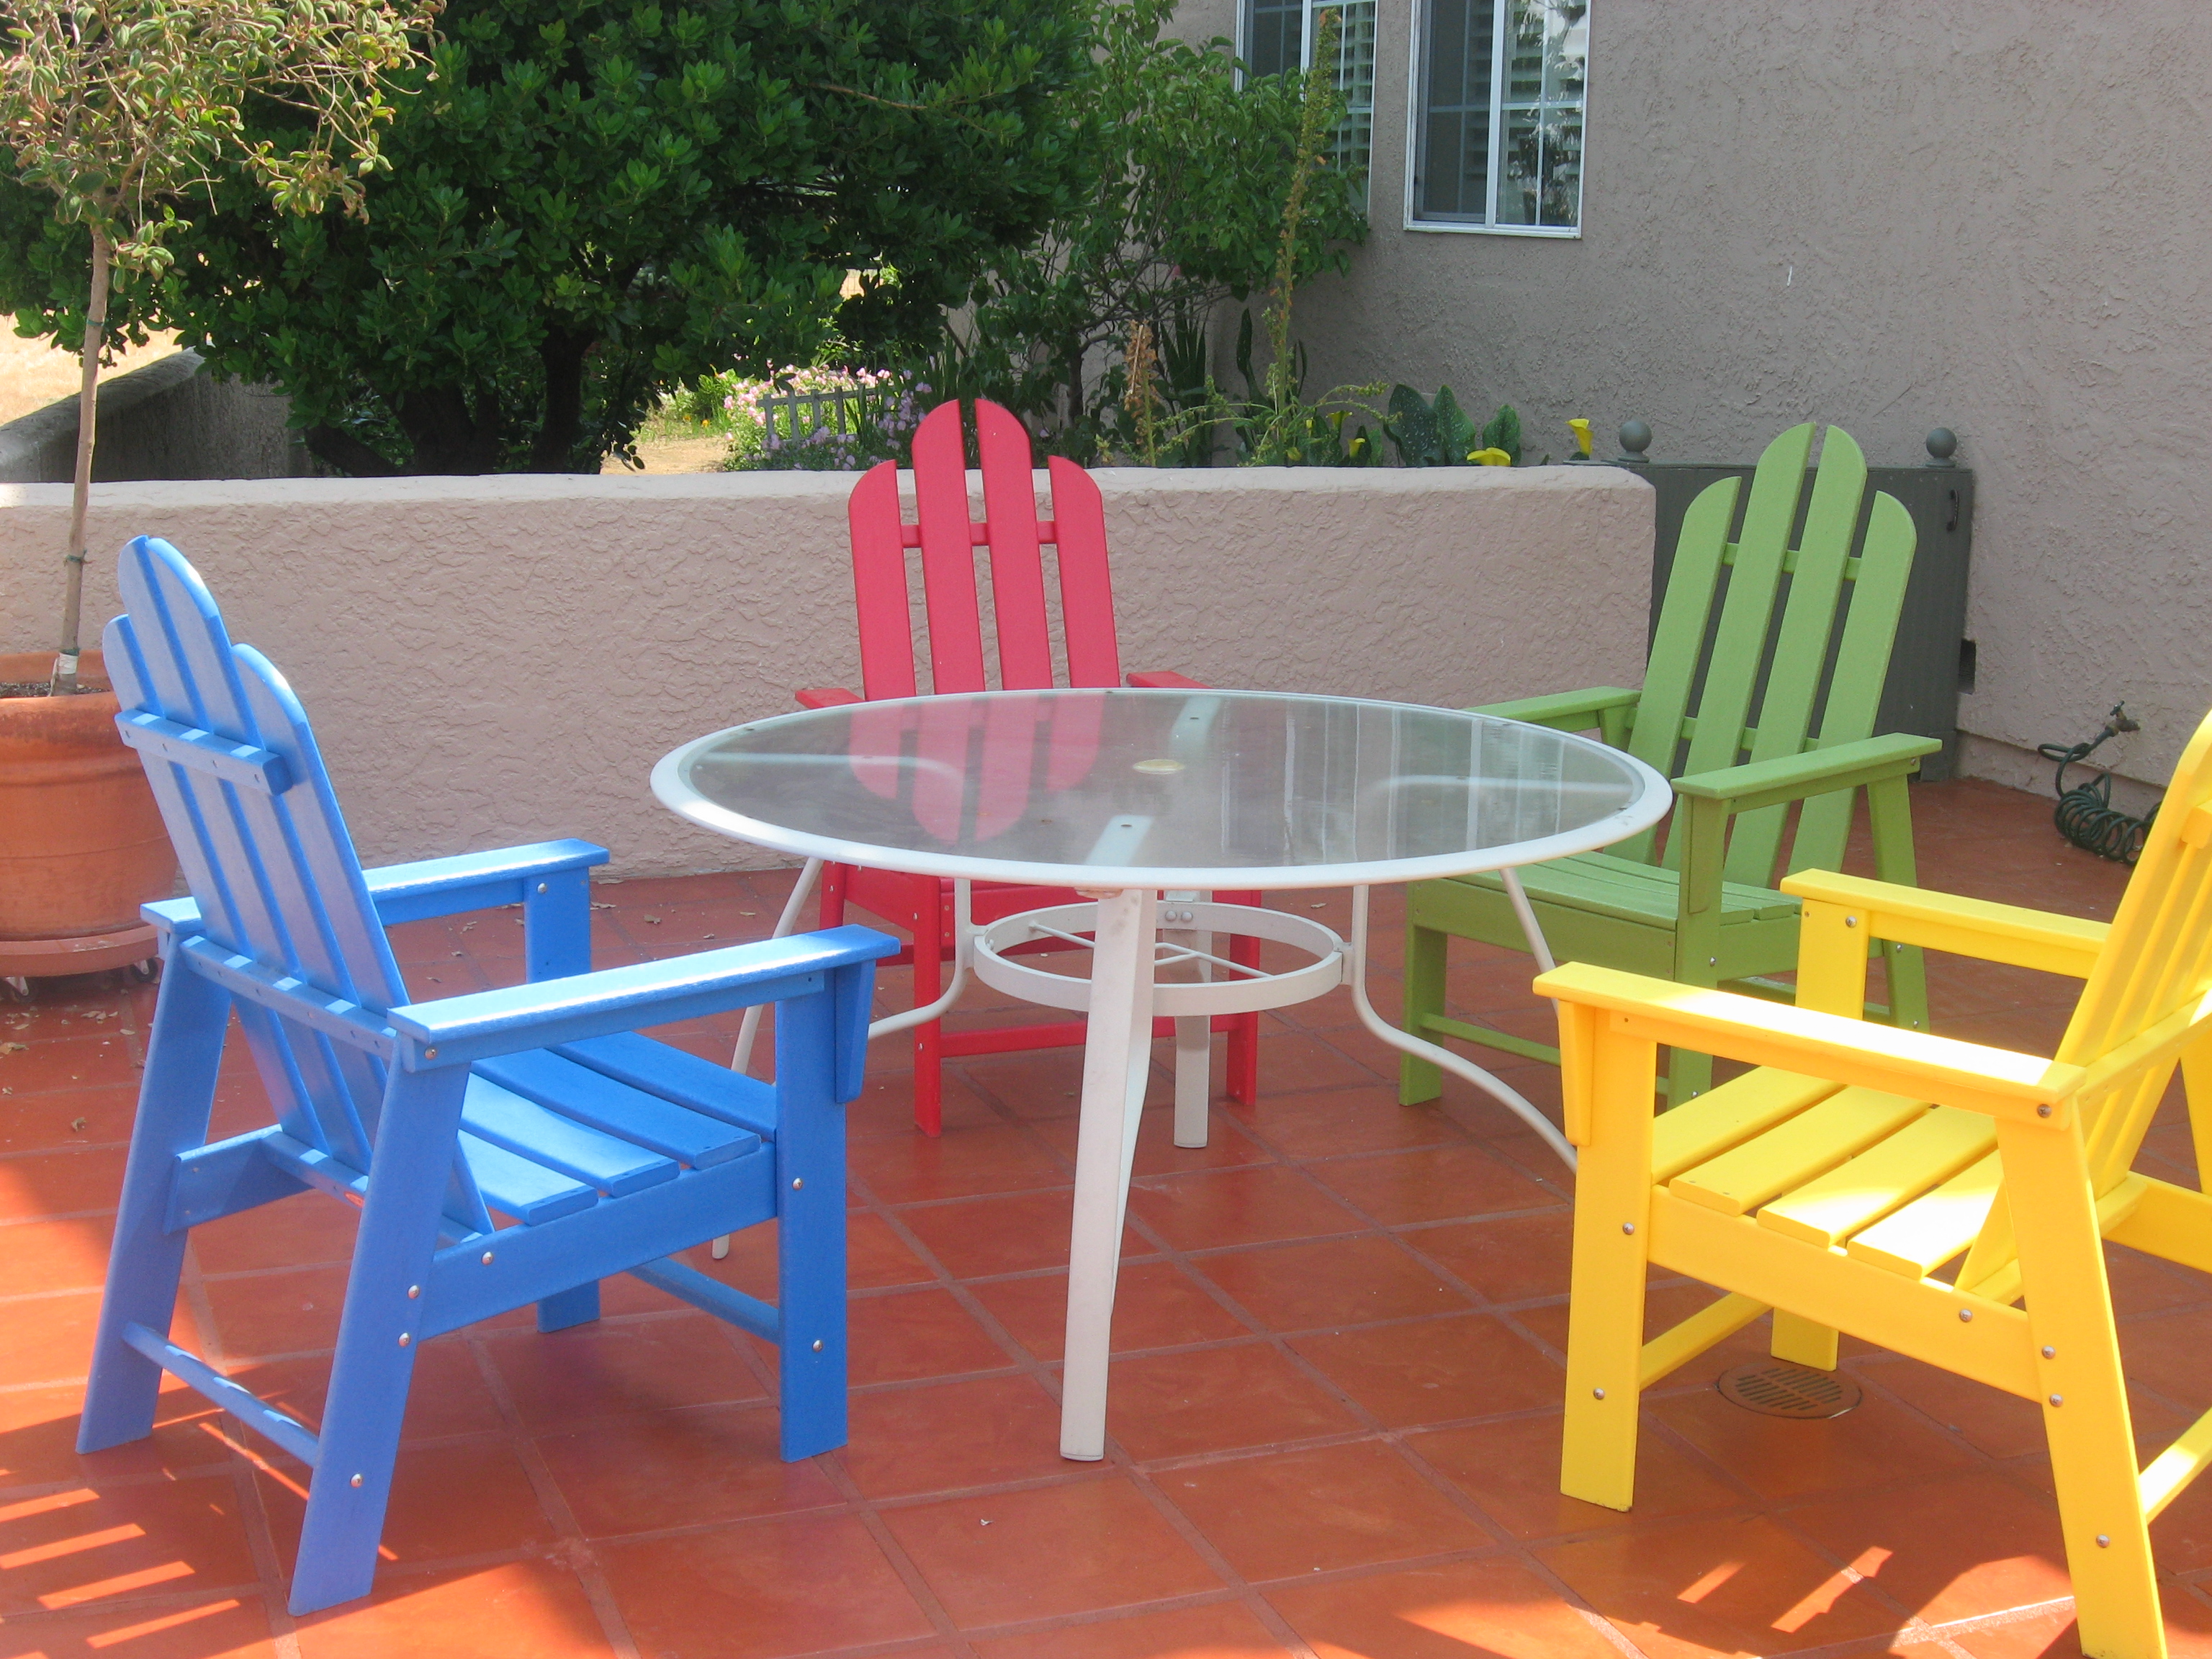 Green Frog's Recycled Plastic Outdoor Furniture Blog | Go 